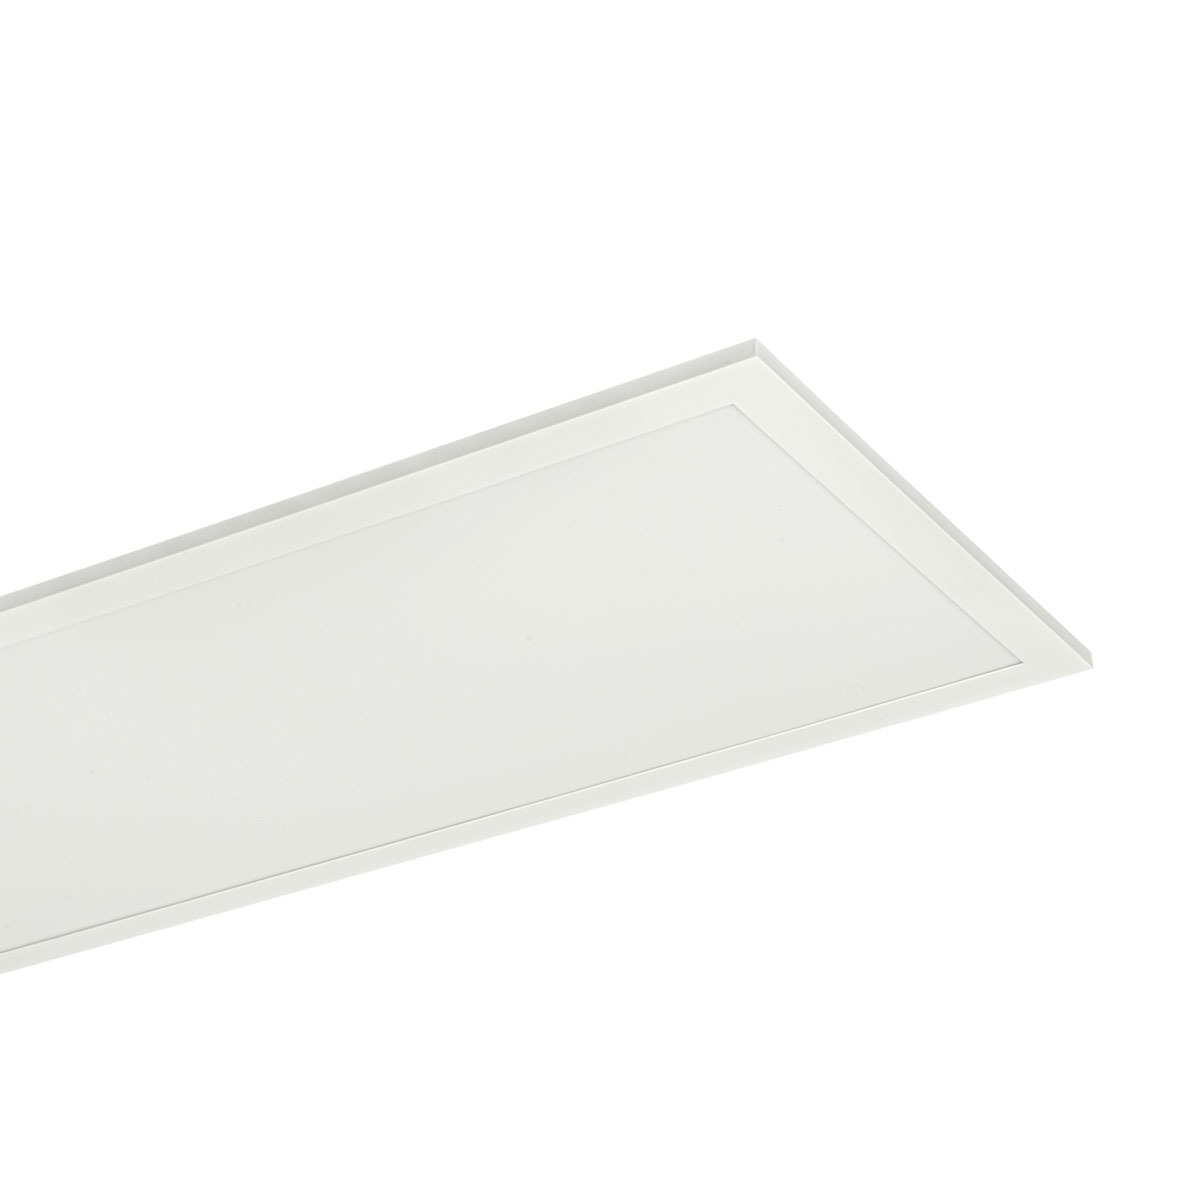 ECO PANEL G2 RECESSED MODULE 1200X300 27W COLOUR SELECT 1-10V